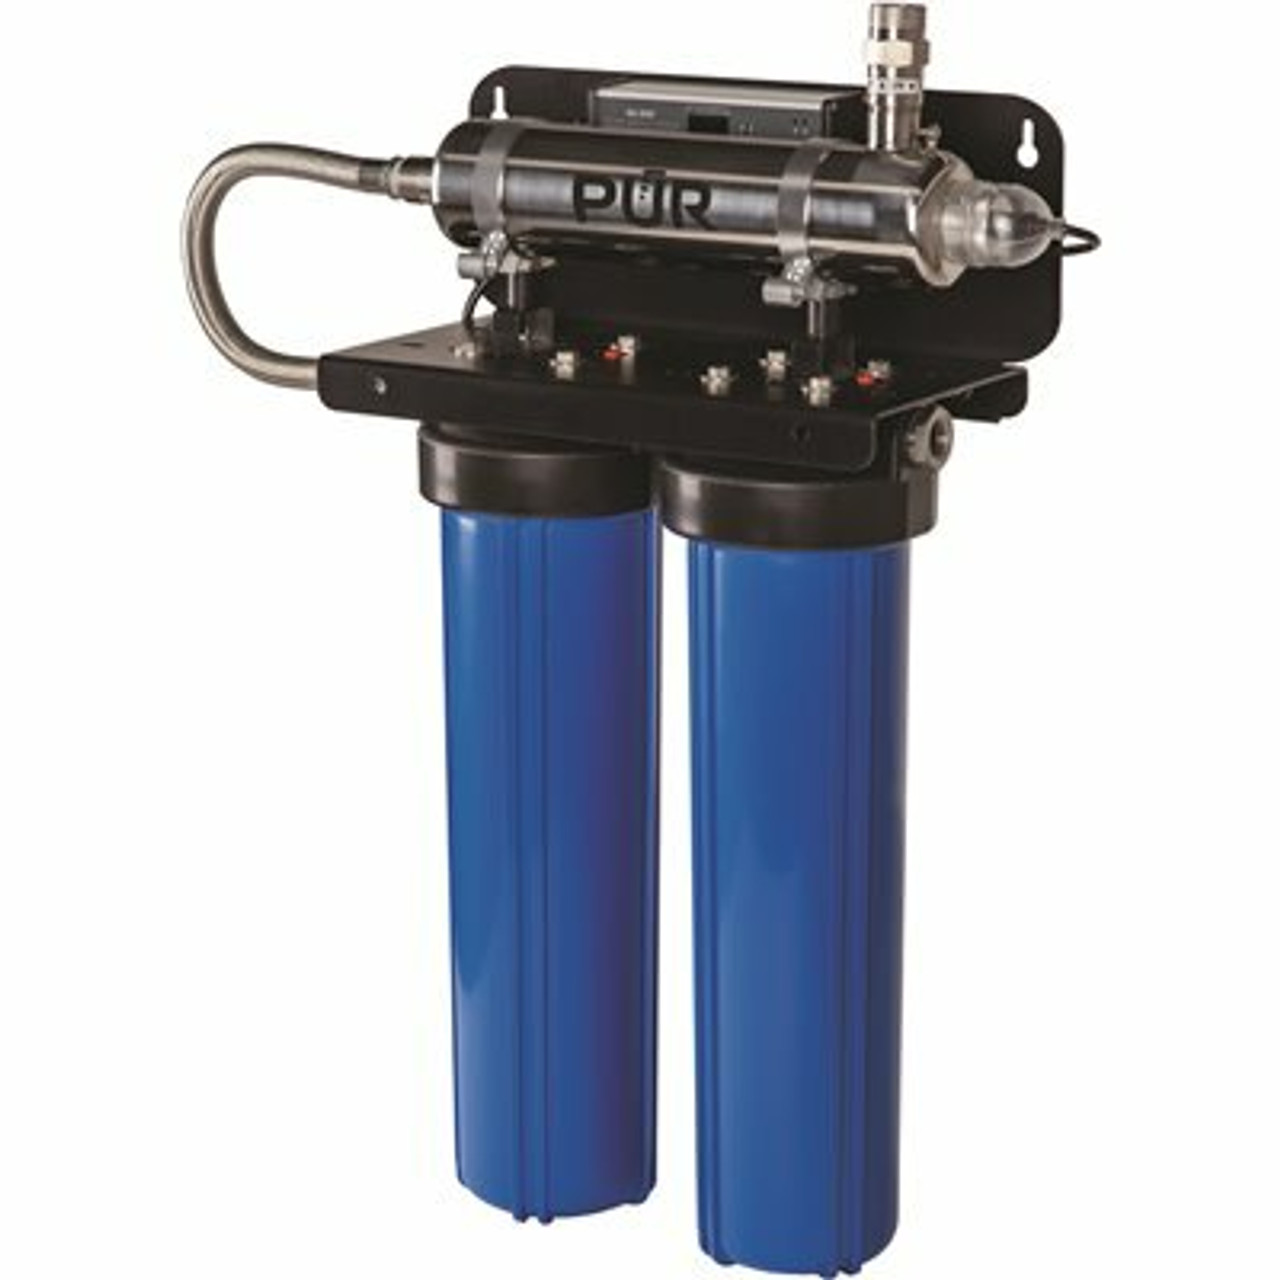 Pur 15 Gpm Whole Home Ultraviolet Water Disinfection And Filtration System With Mounting Rack